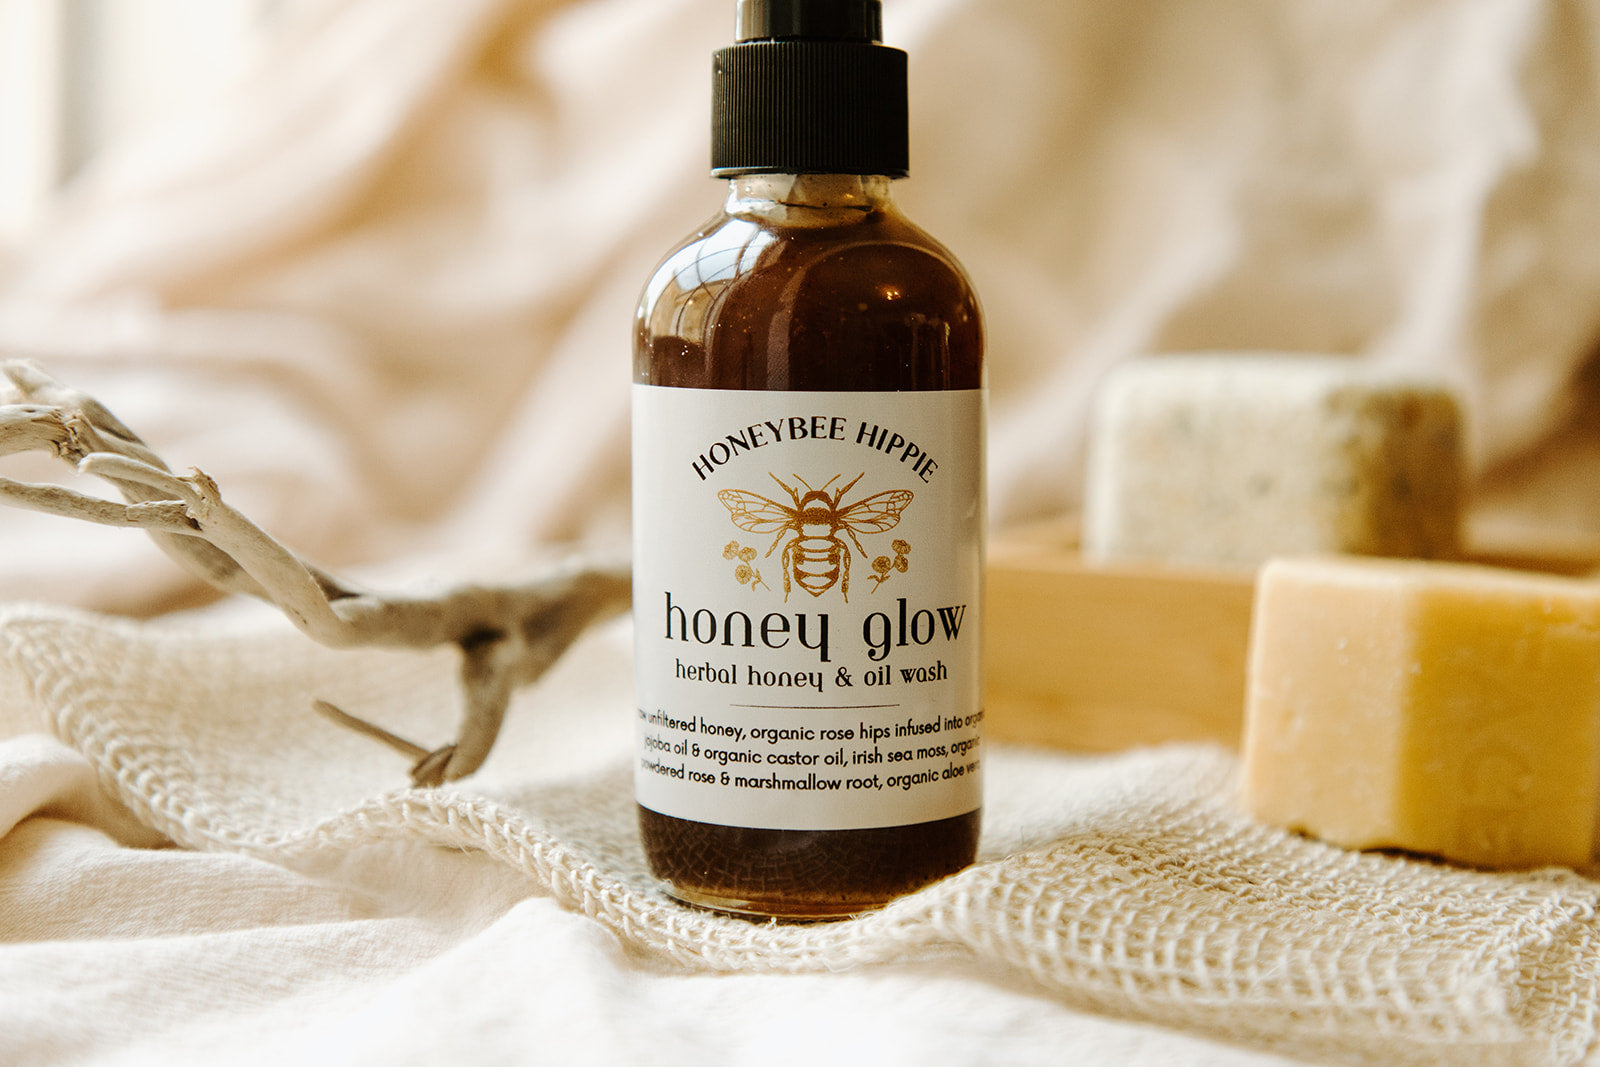 a single bottle of honeybee hippie's herbal honey and oil facial cleansing wash made with organic natural ingredients for washing irritated and acne prone skin